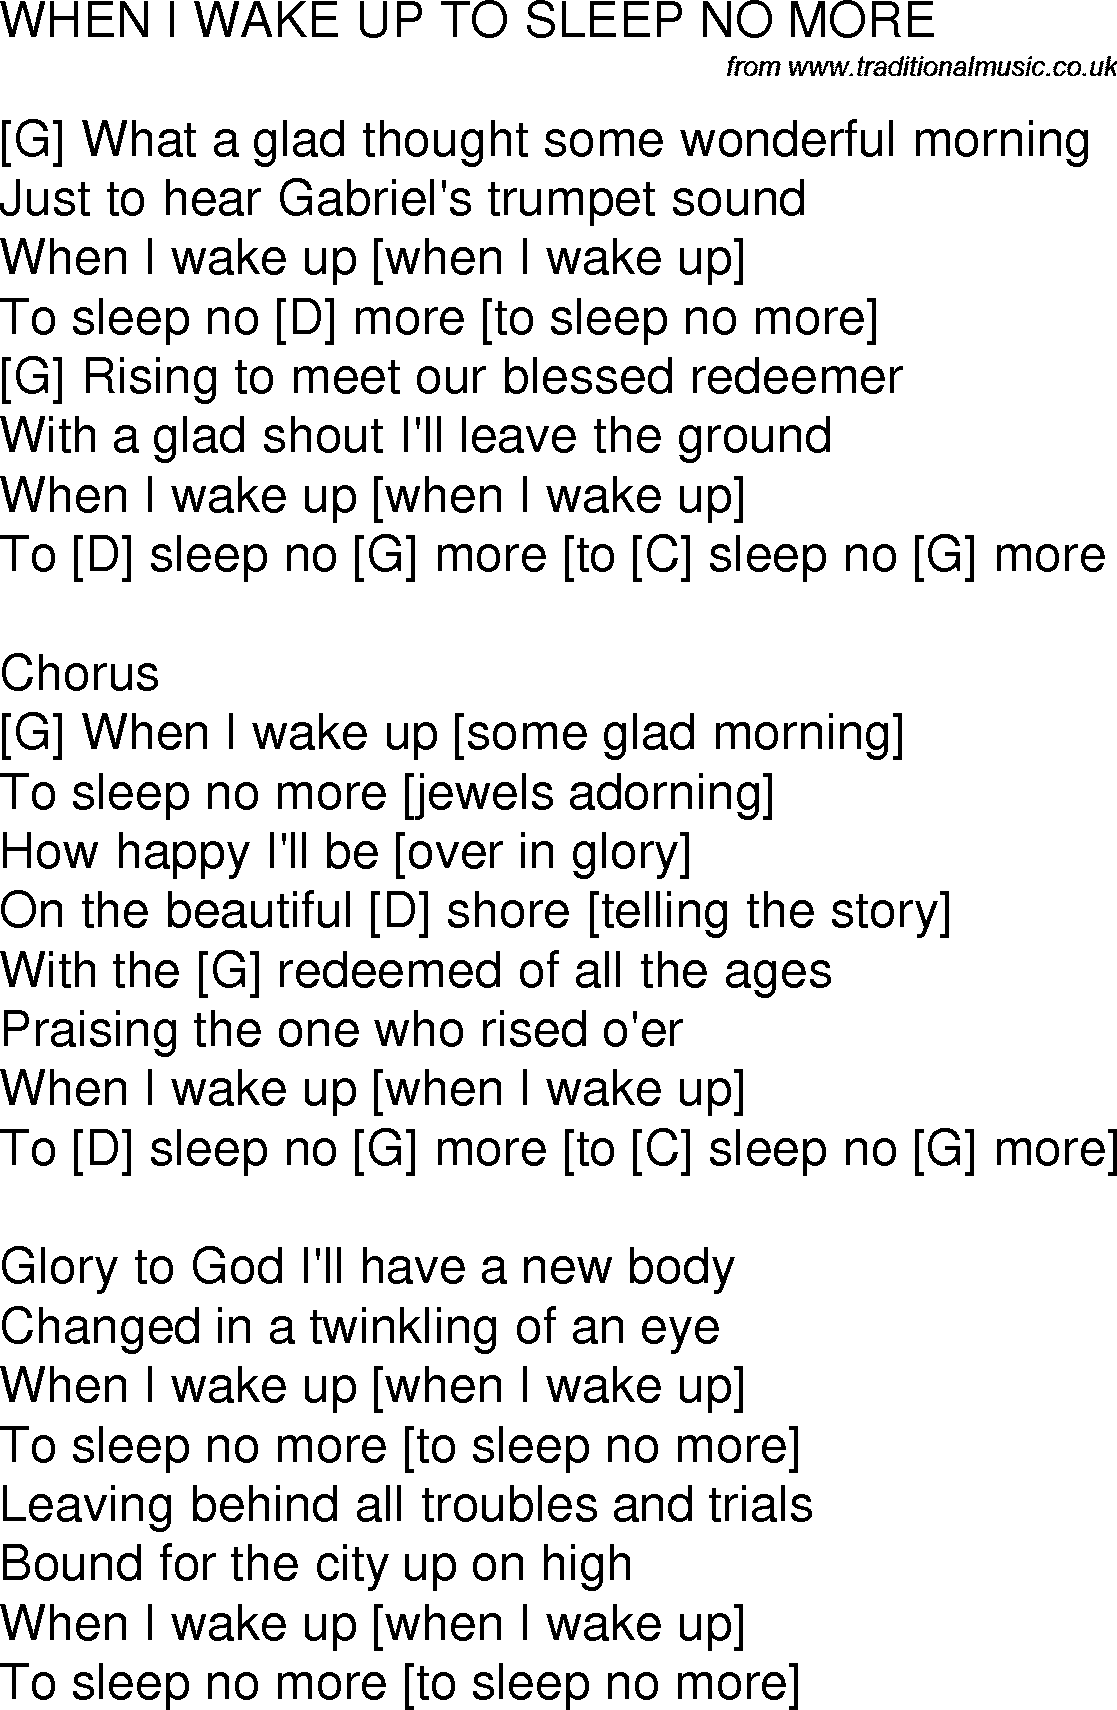 Old time song lyrics with chords for When I Wake Up To Sleep No More G